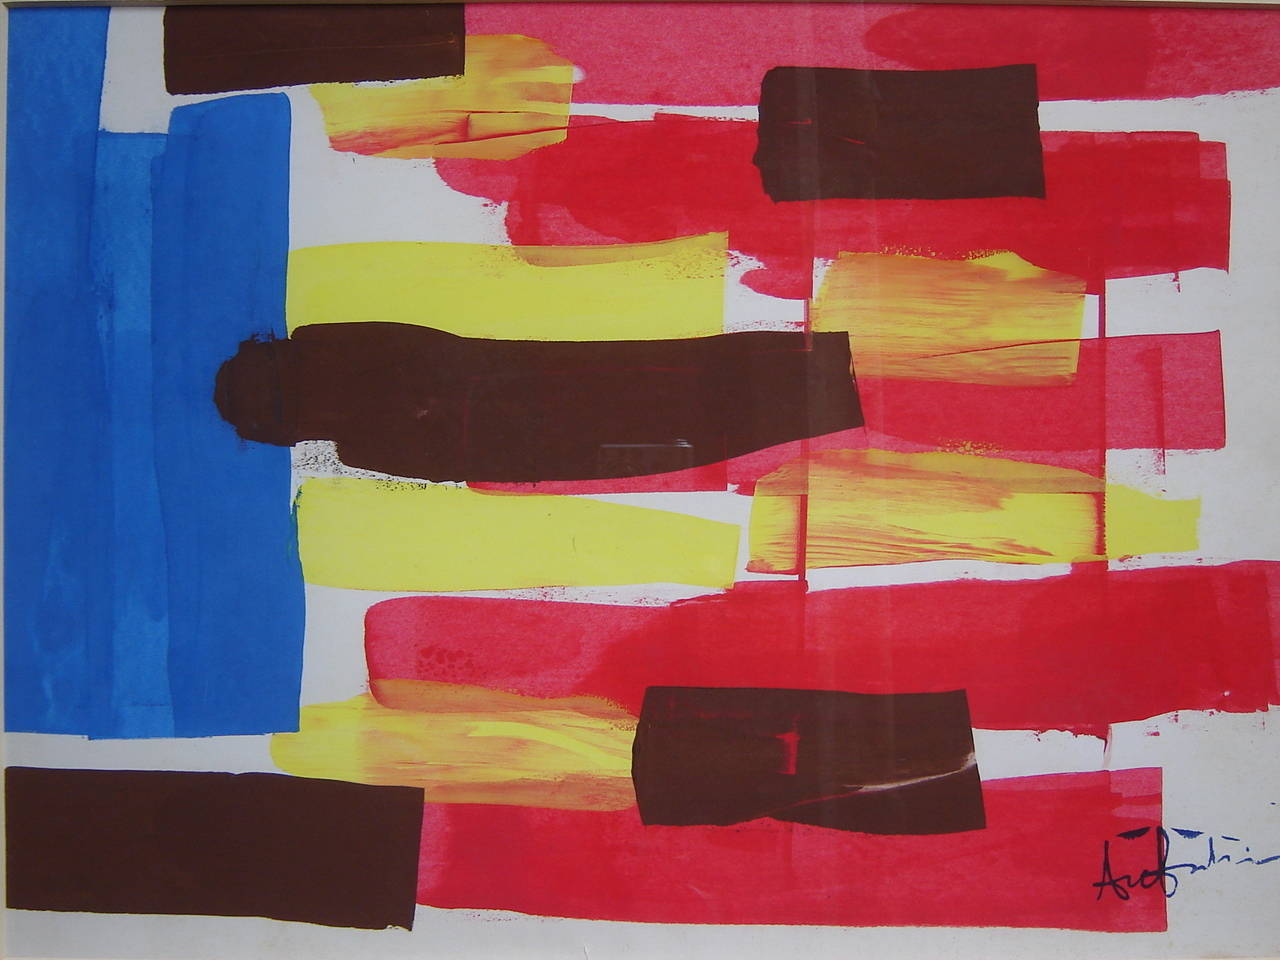 Blue, red, yellow, and brown gouache composition by Ange Falchi, incredible 20th artist (1913-1997).
Ange Falchi was a painter and sculptor from the Nice school.
He was born in Vence in the Alpes Maritimes in France.
He graduated from the School